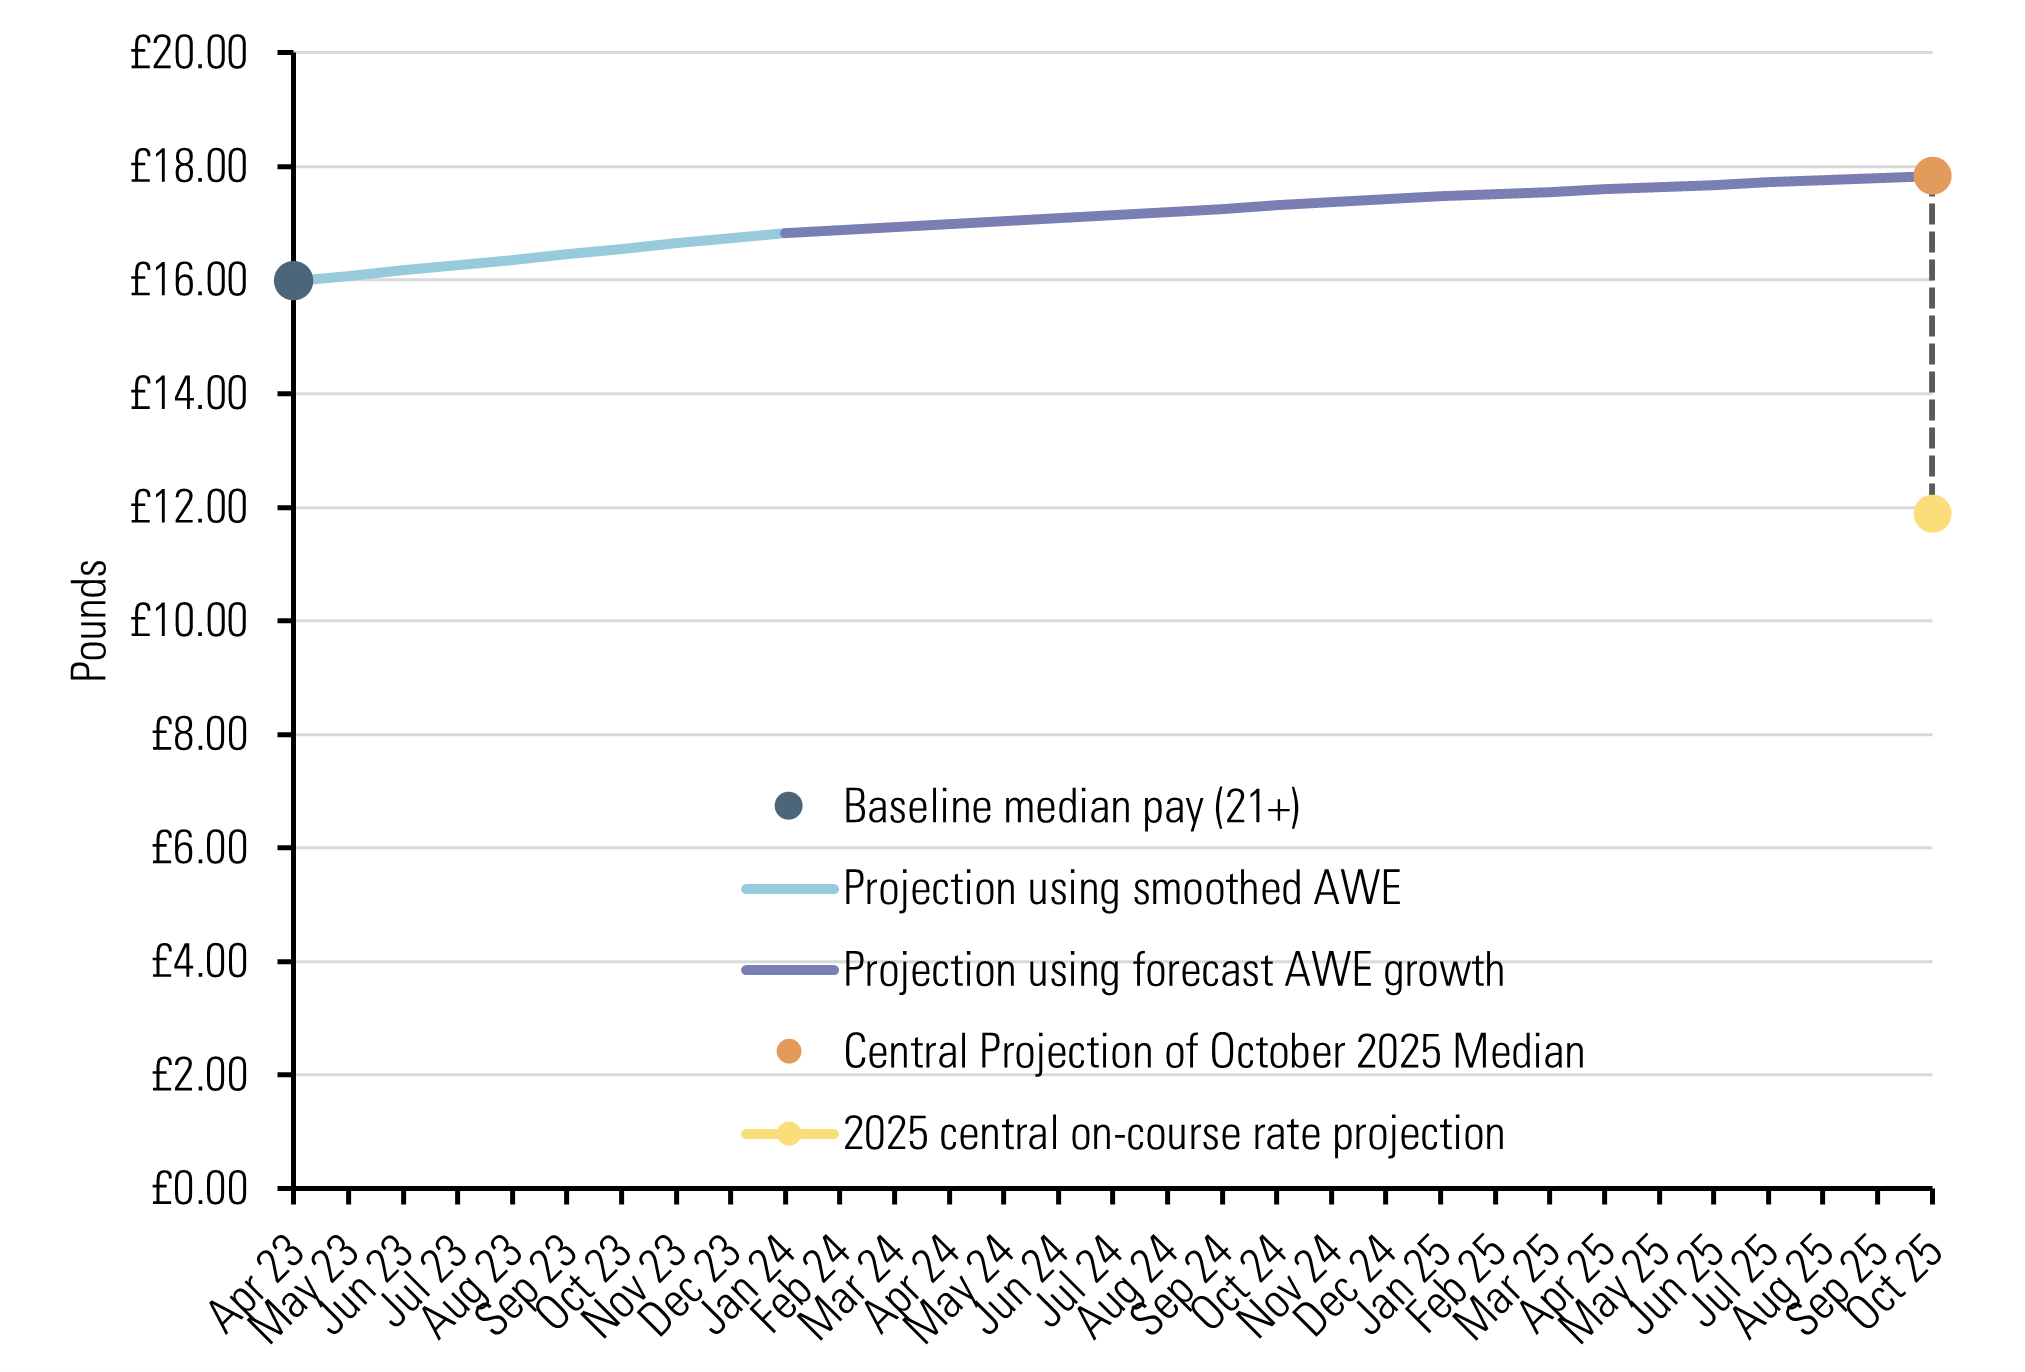 Graph showing projection using forecasts from April 2024 estimate of median pay to estimate of median pay in October 2025